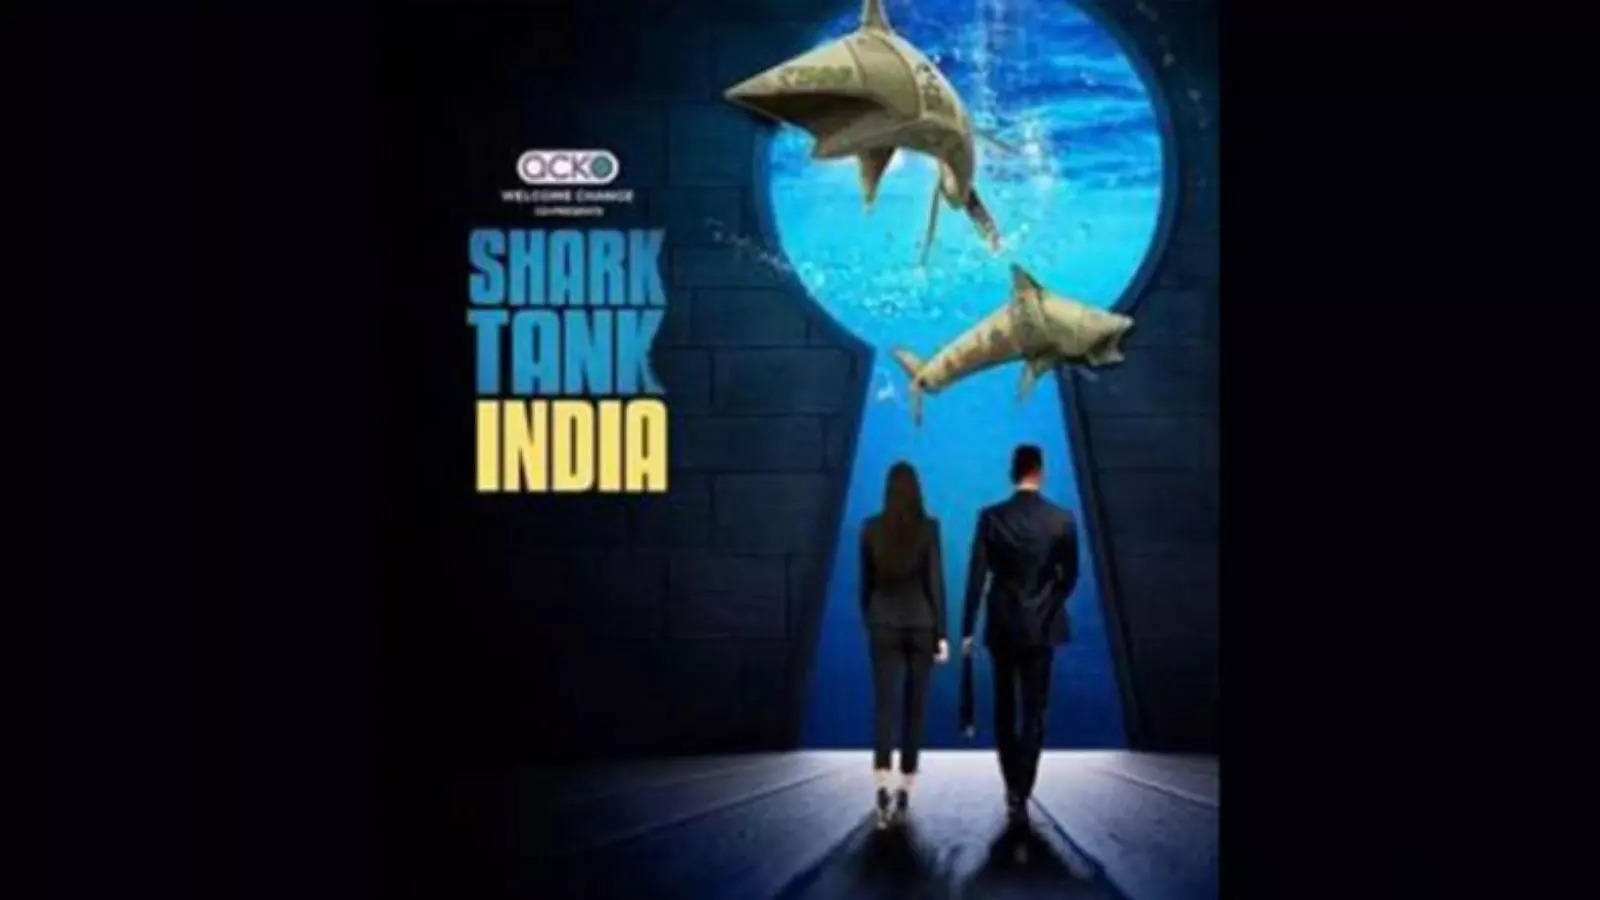 Shark Tank India Season 3: 'Shark Tank India' is back with a third season!  Here's how you can participate in reality TV show - The Economic Times